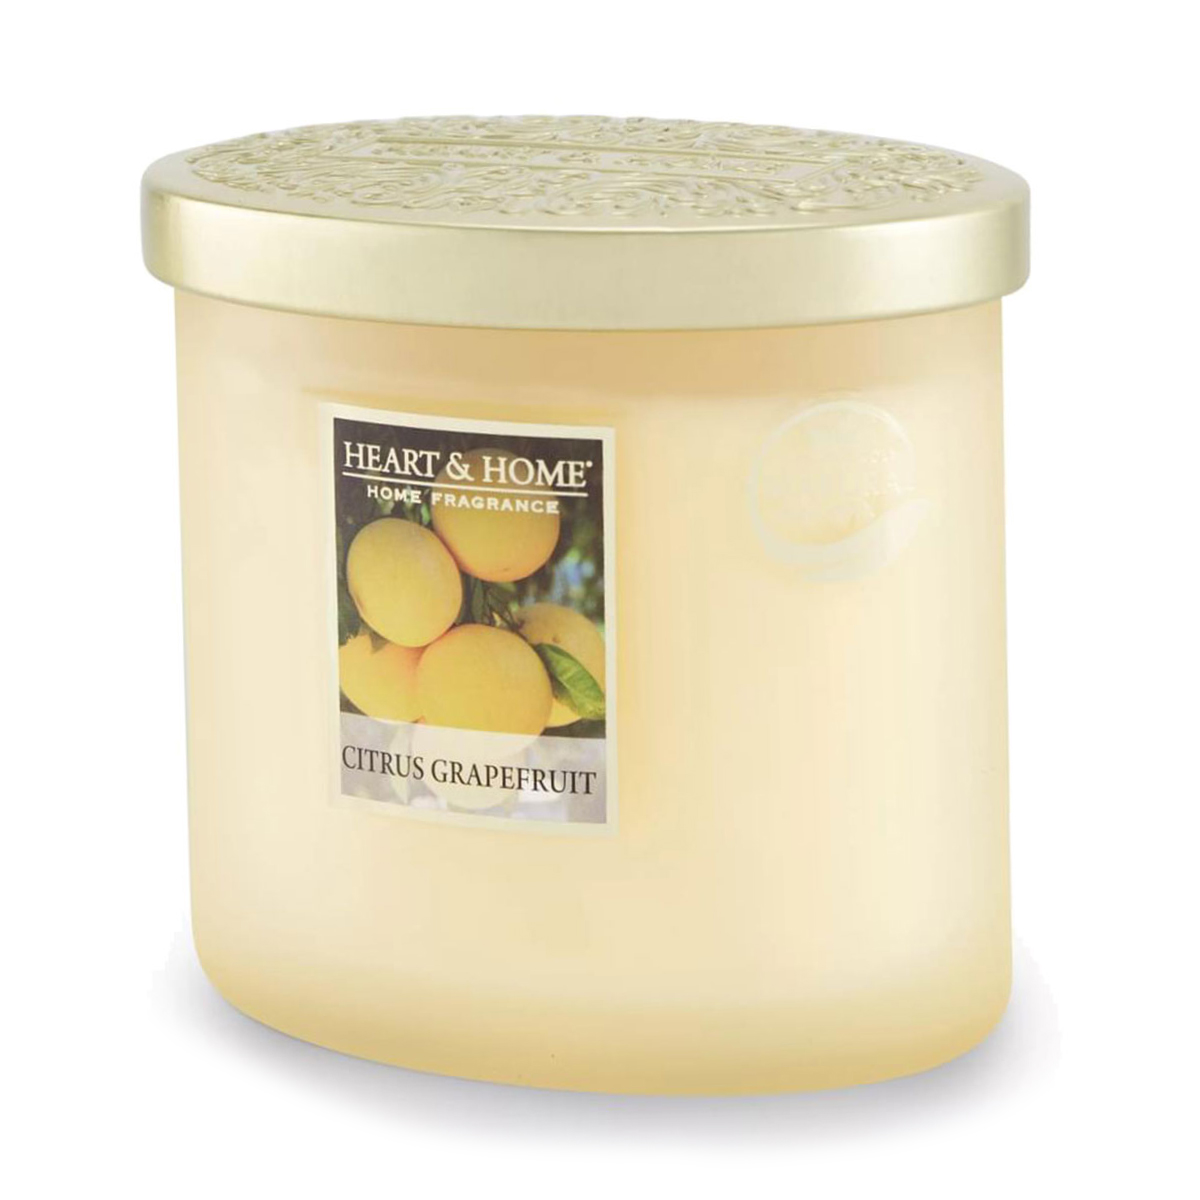 Heart and Home Ellipse Candle with 2 Wicks - Grapefruit